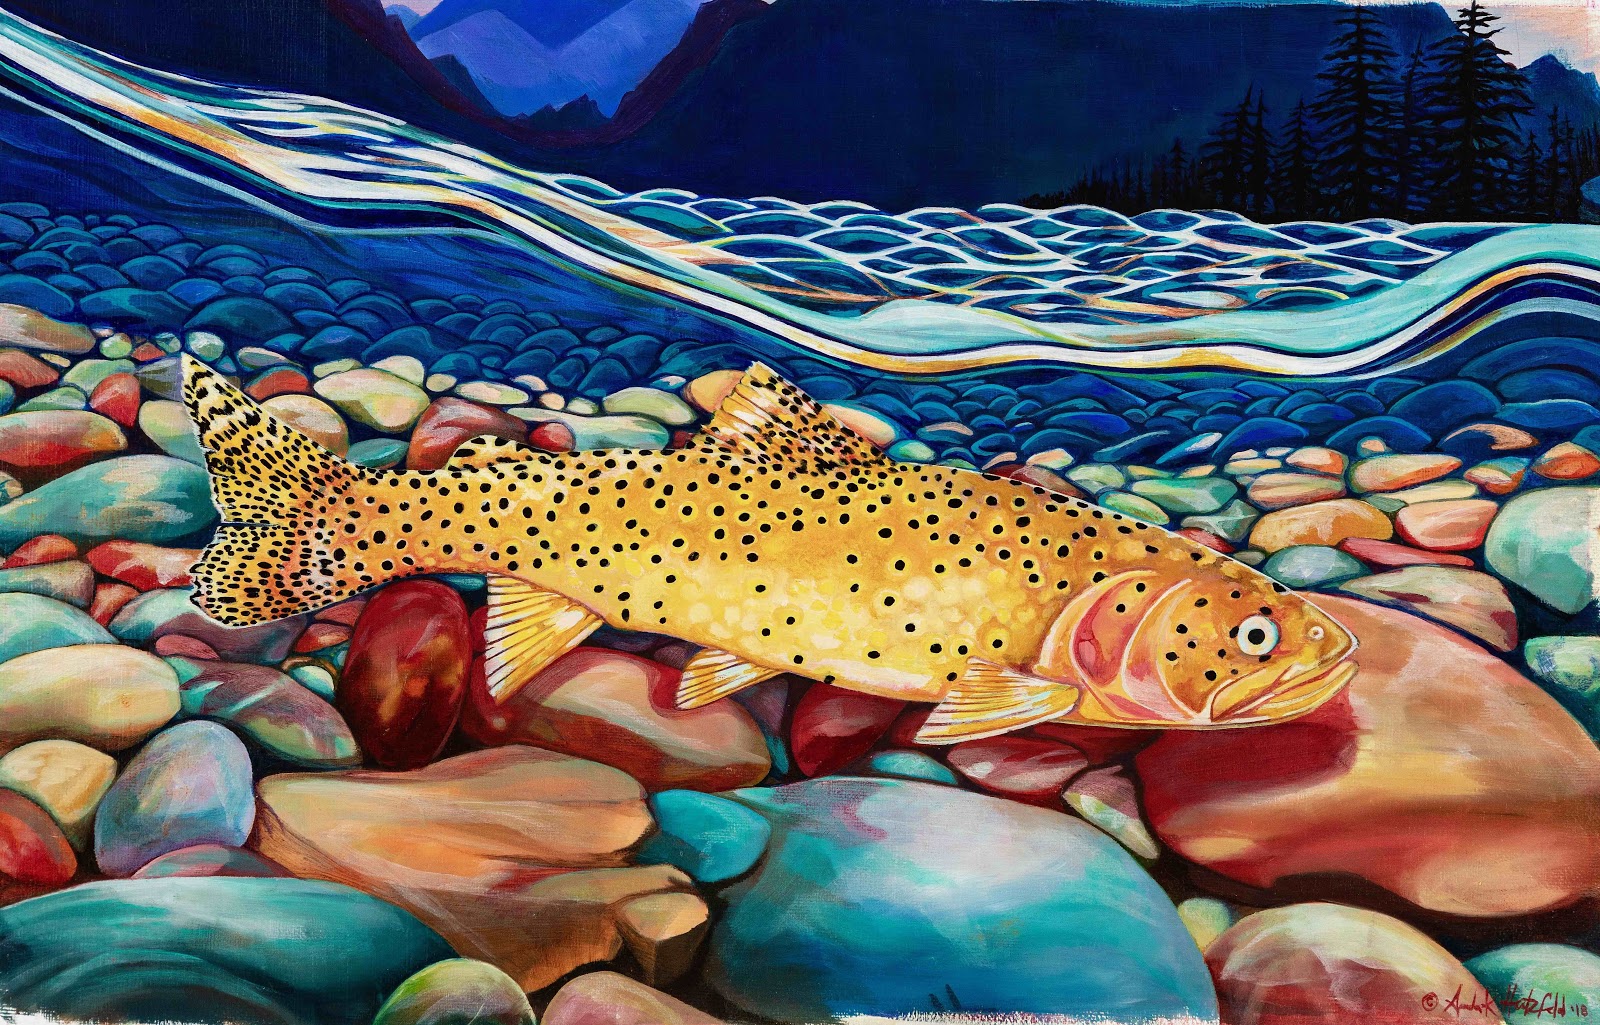 Painting of a cutthroat trout swimming in a stream